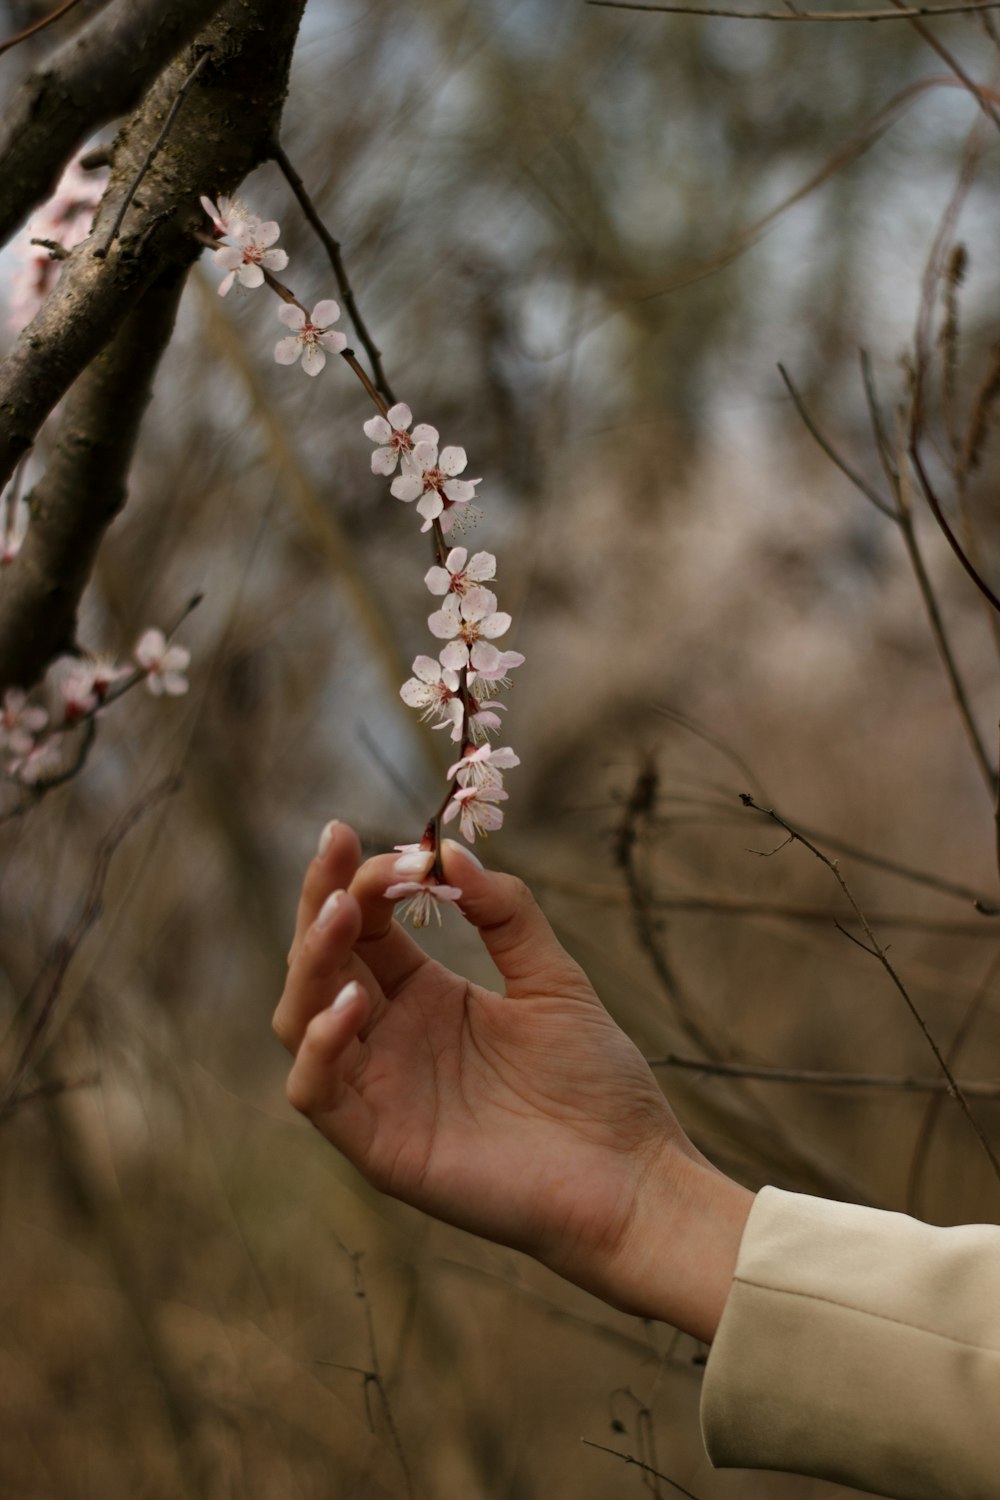 a hand holding a branch with white flowers